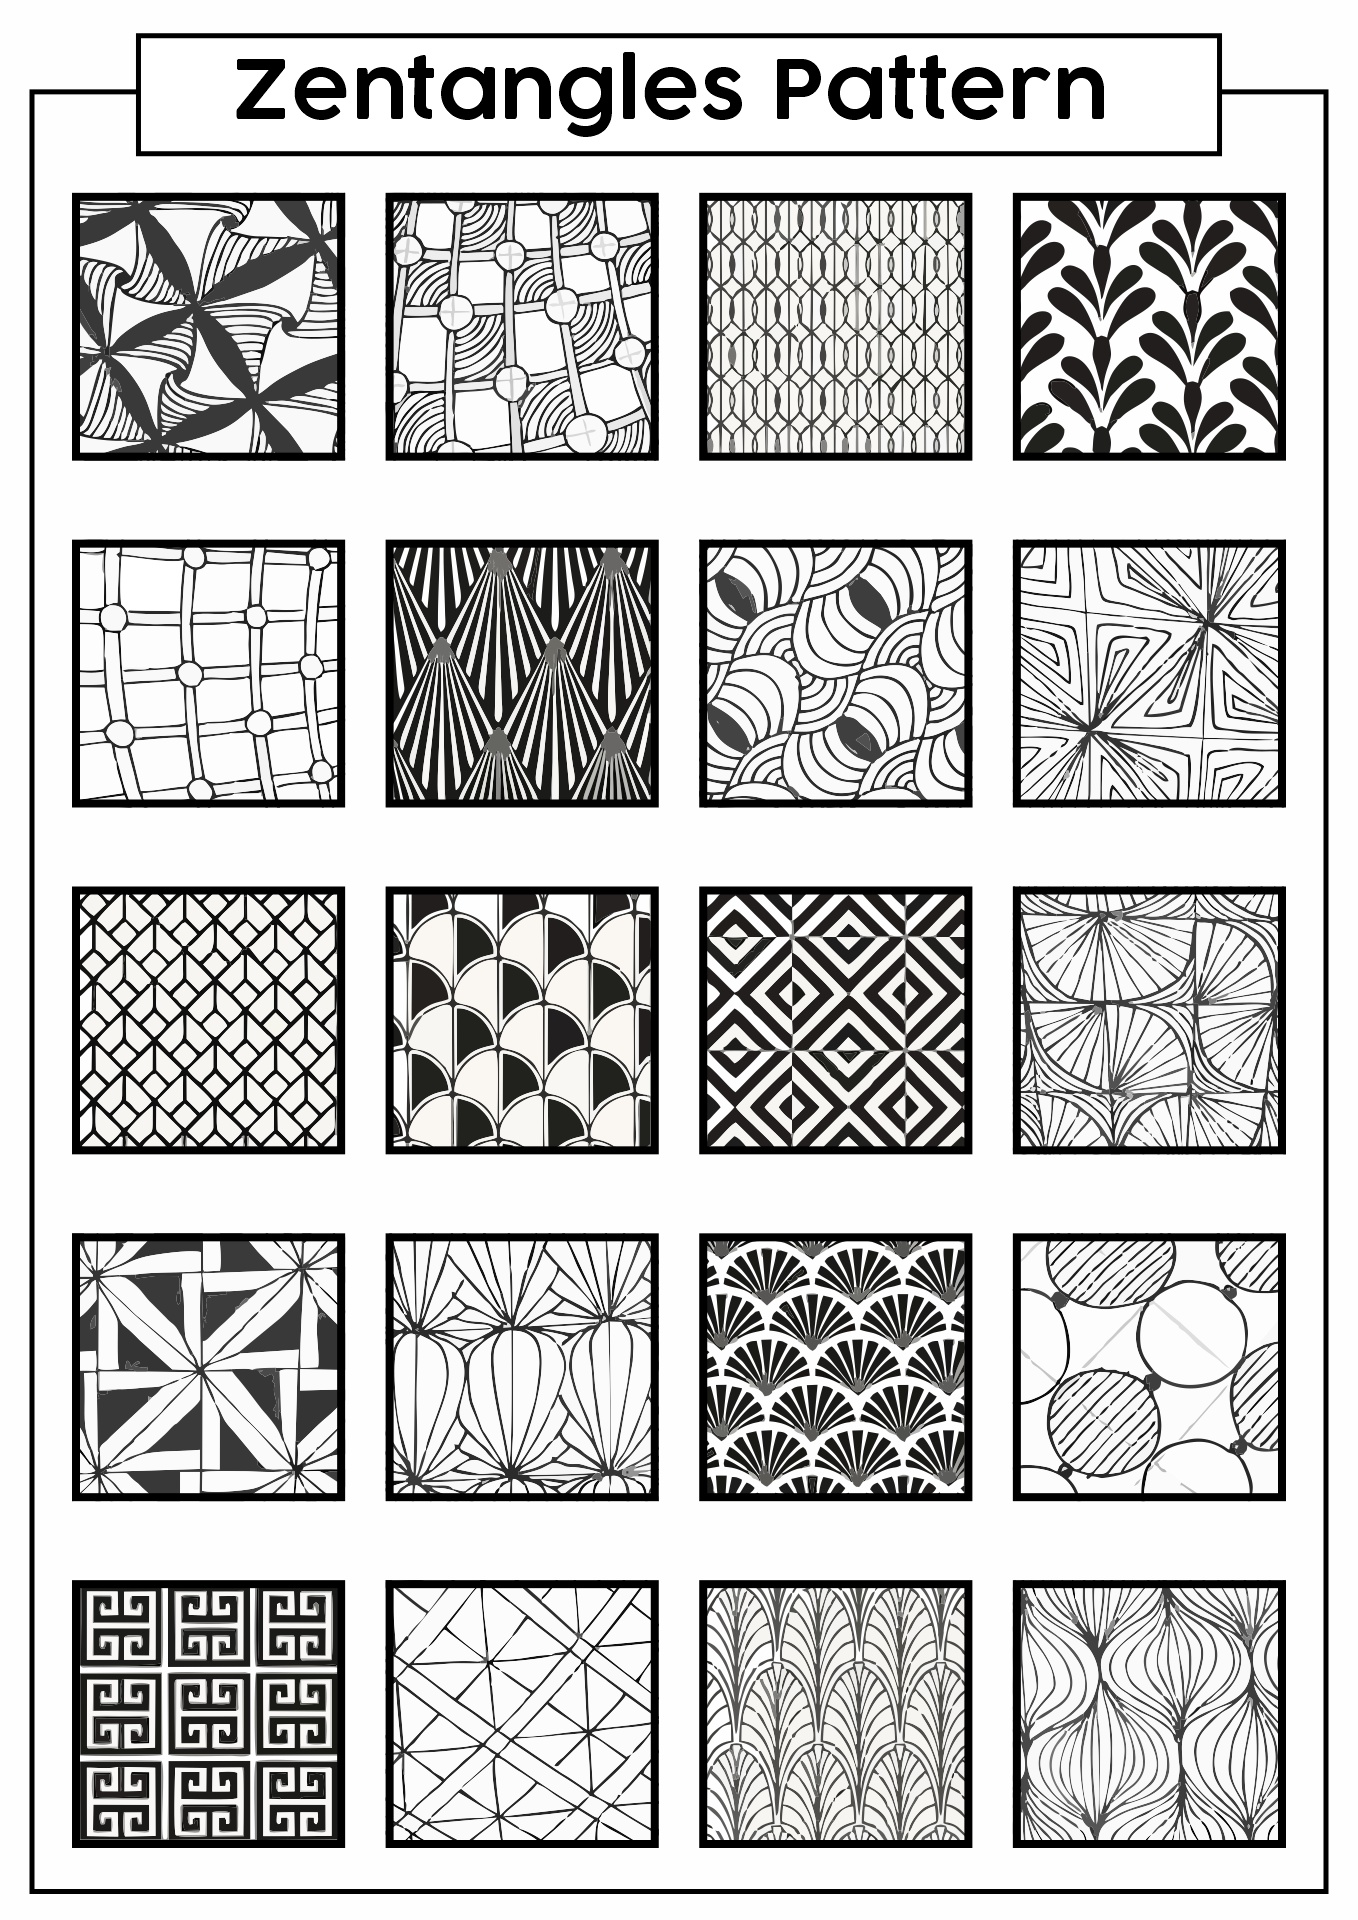 Texture and Pattern for Zentangles Image